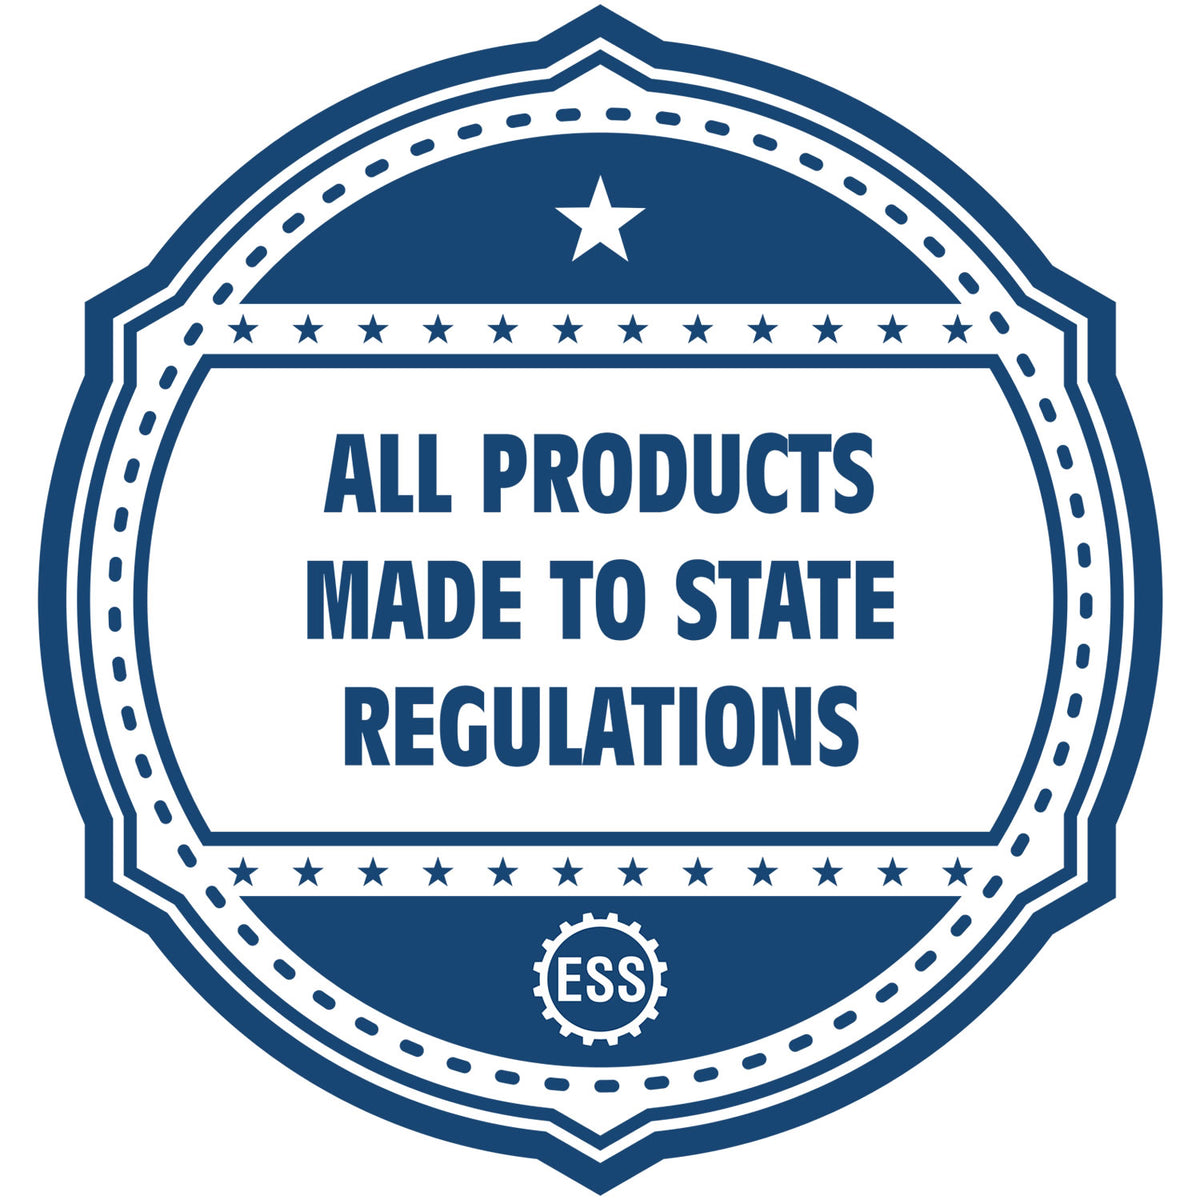 A blue icon or badge for the Slim Pre-Inked New Jersey Professional Geologist Seal Stamp showing that this product is made in compliance with state regulations.